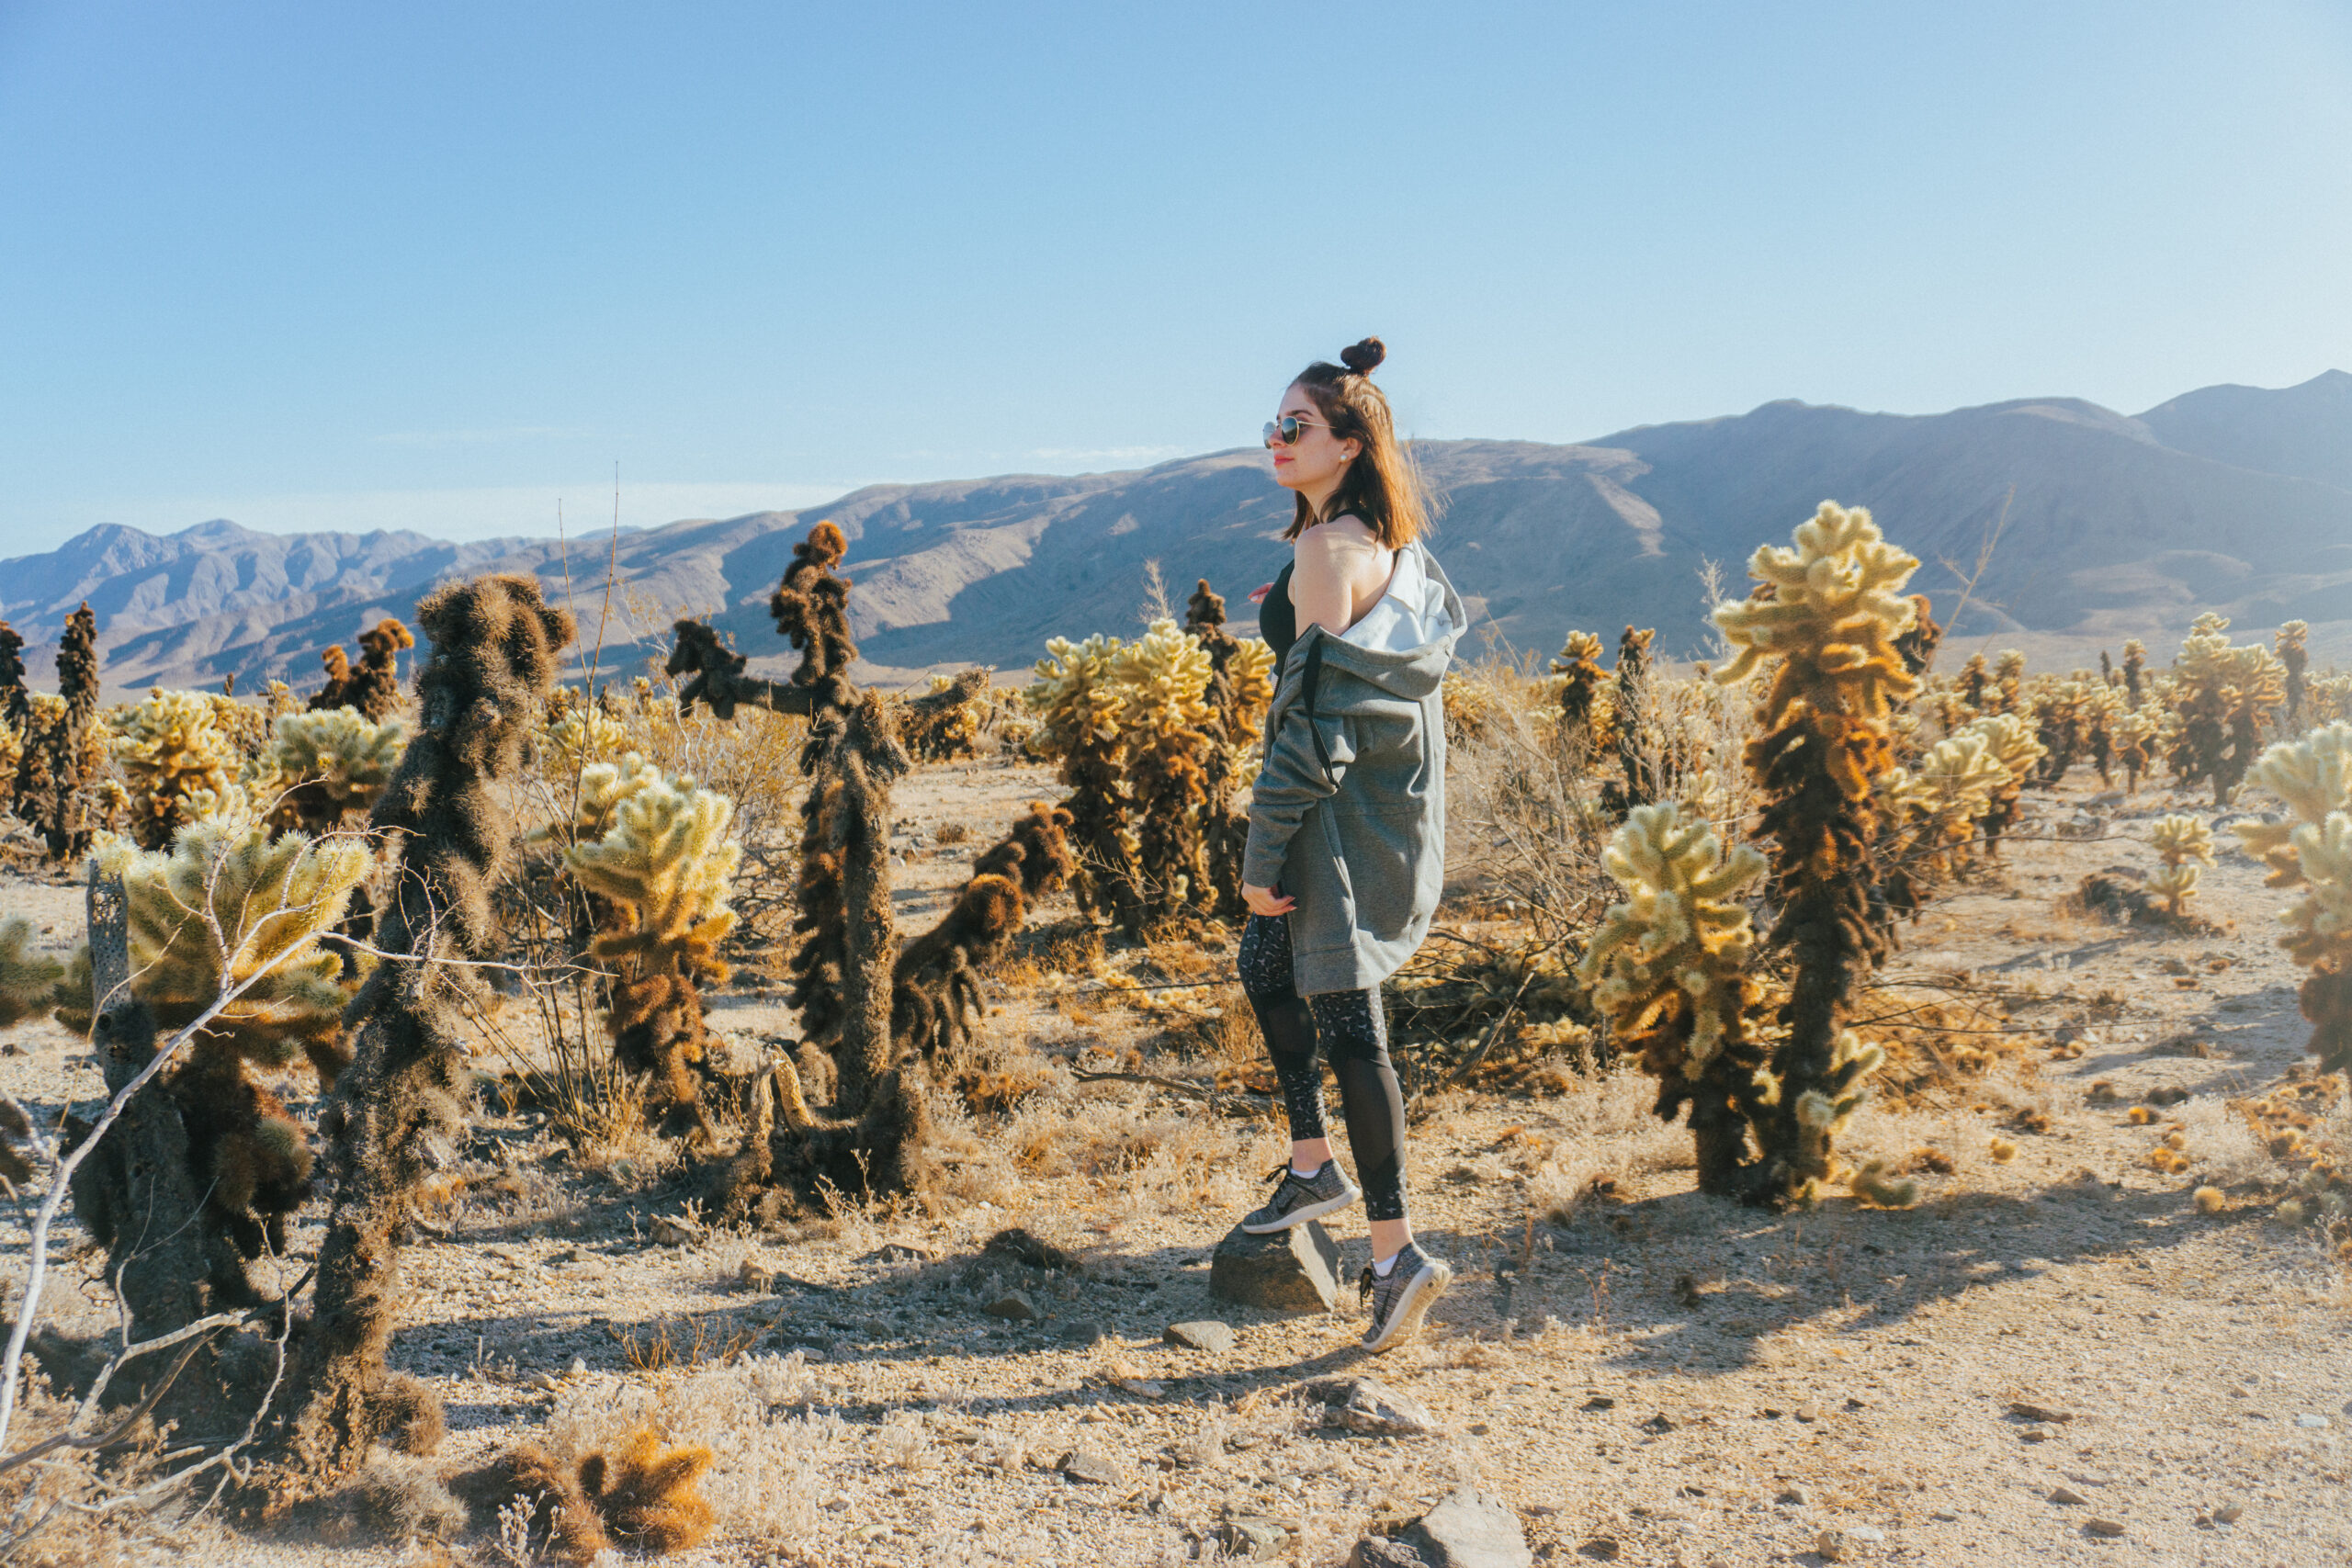 Weekend in Joshua Tree – Where to Stay, What to Do, & Where to Eat